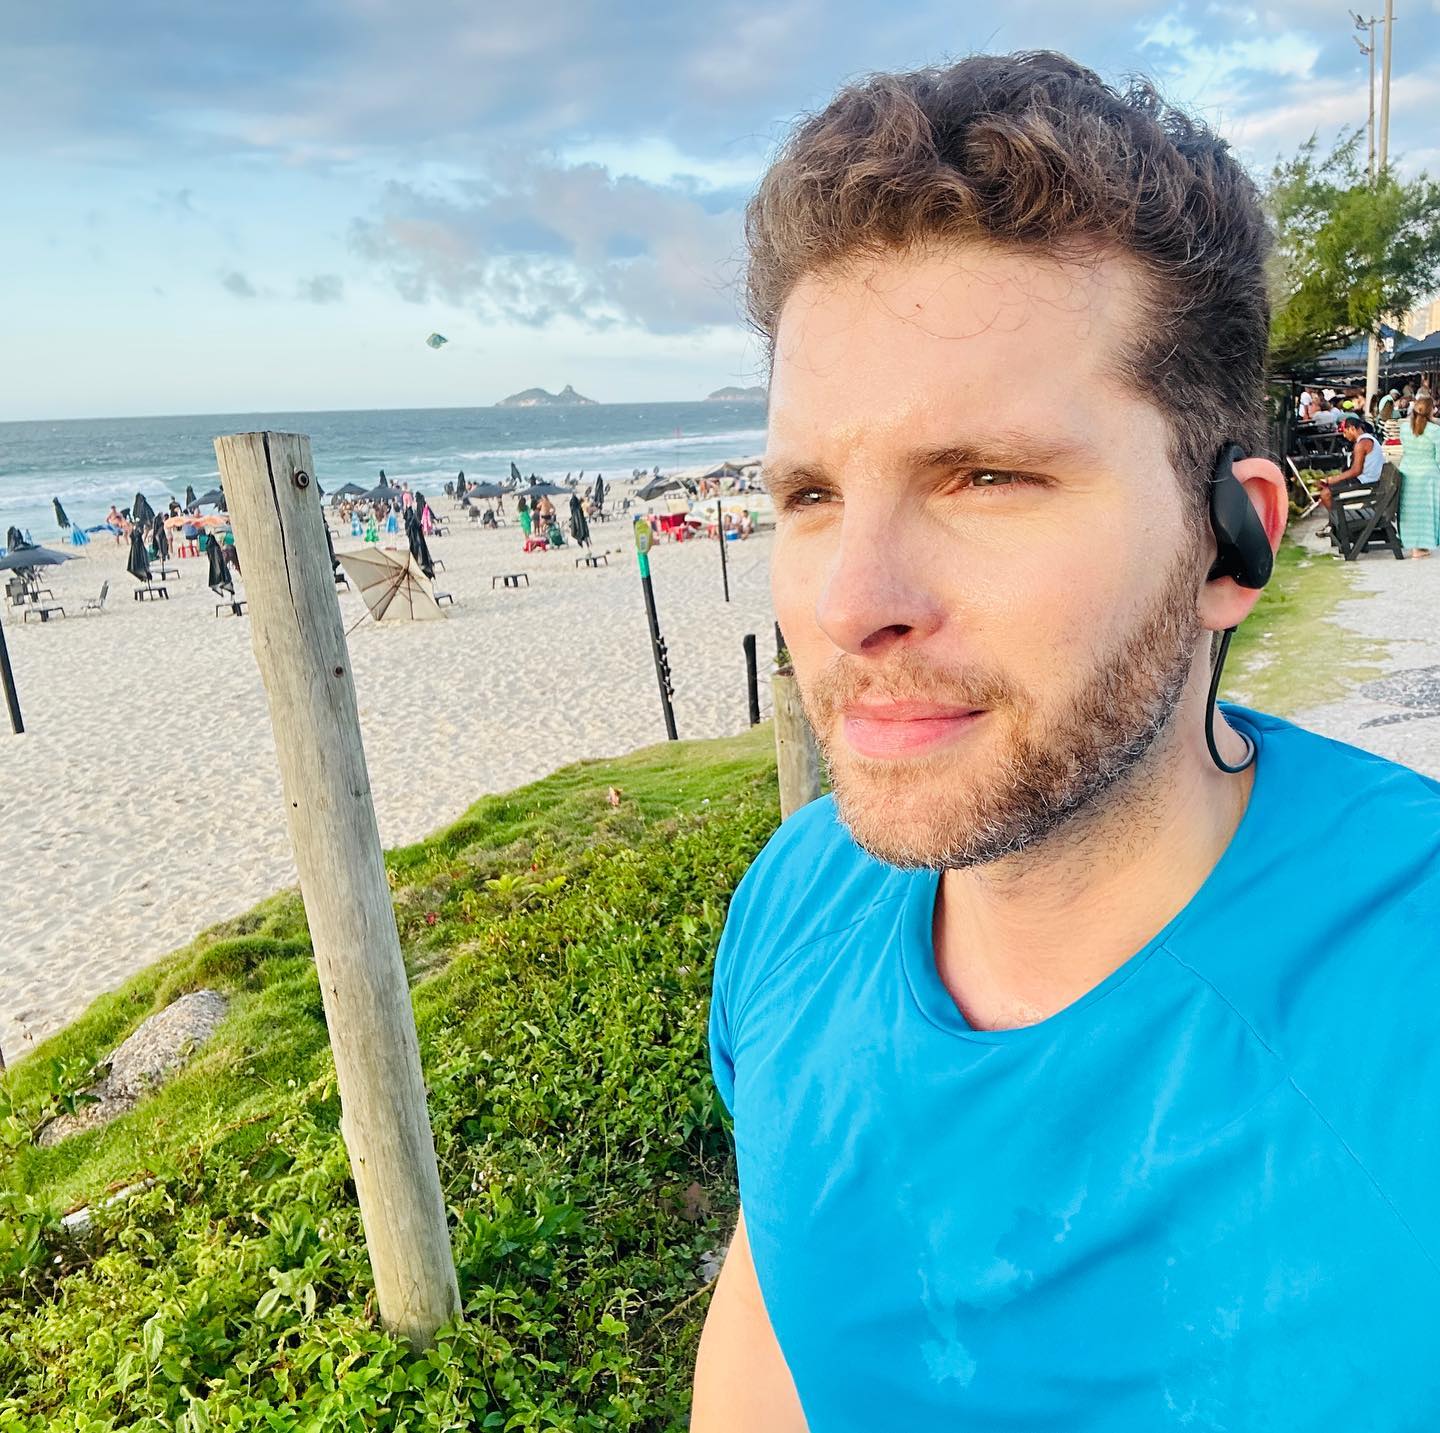 https://e.radikal.host/2023/04/20/Photo-by-Thiago-Fragoso-on-January-27-2023.-May-be-a-selfie-of-one-or-more-people-beard-beach-and-ocean.-1.jpg